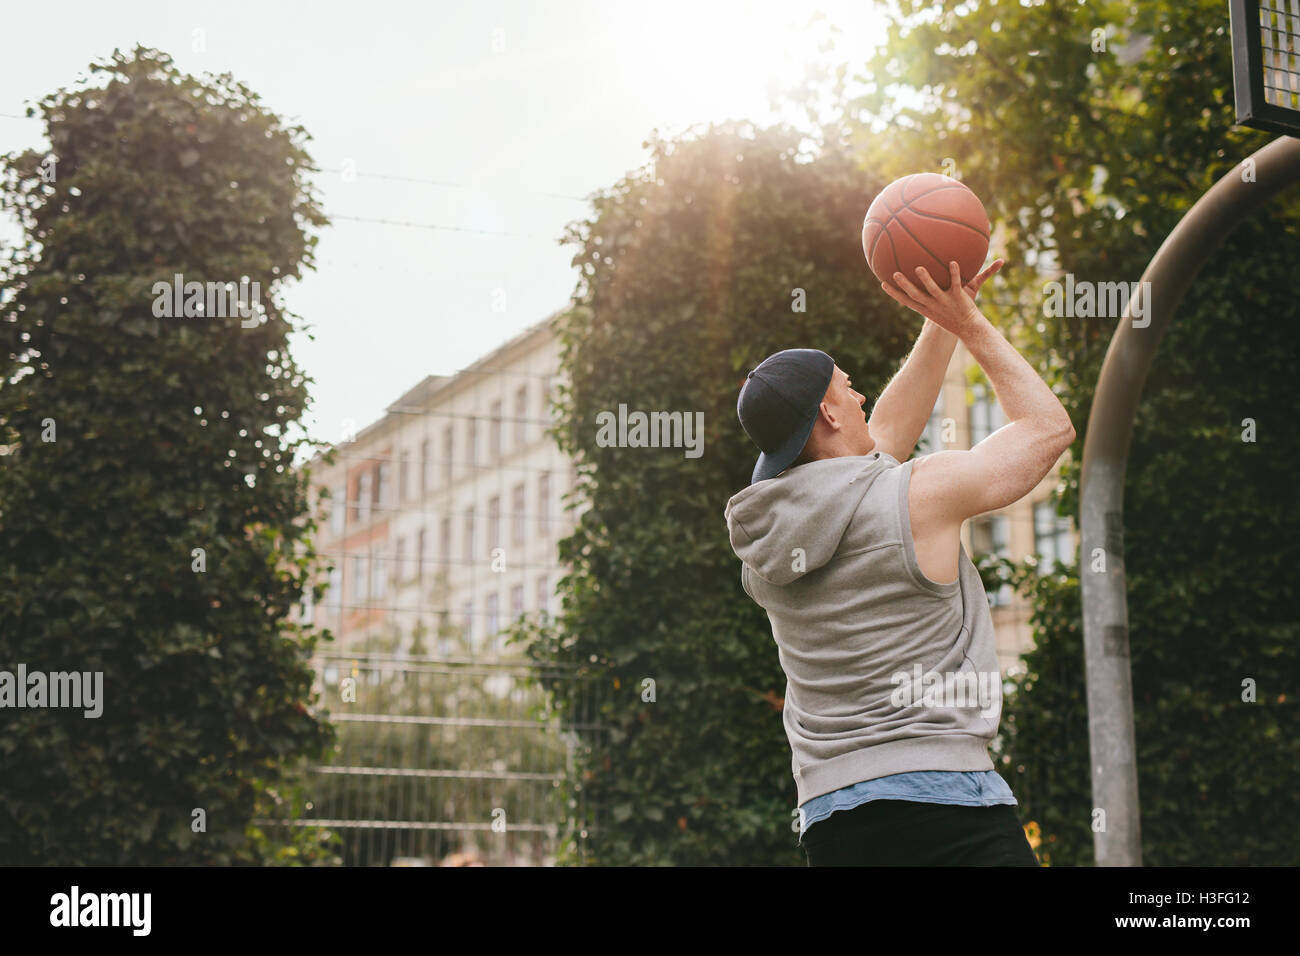 Image of a streetball player playing on outdoor court. Young athletic man taking jump shot on basketball court. Stock Photo